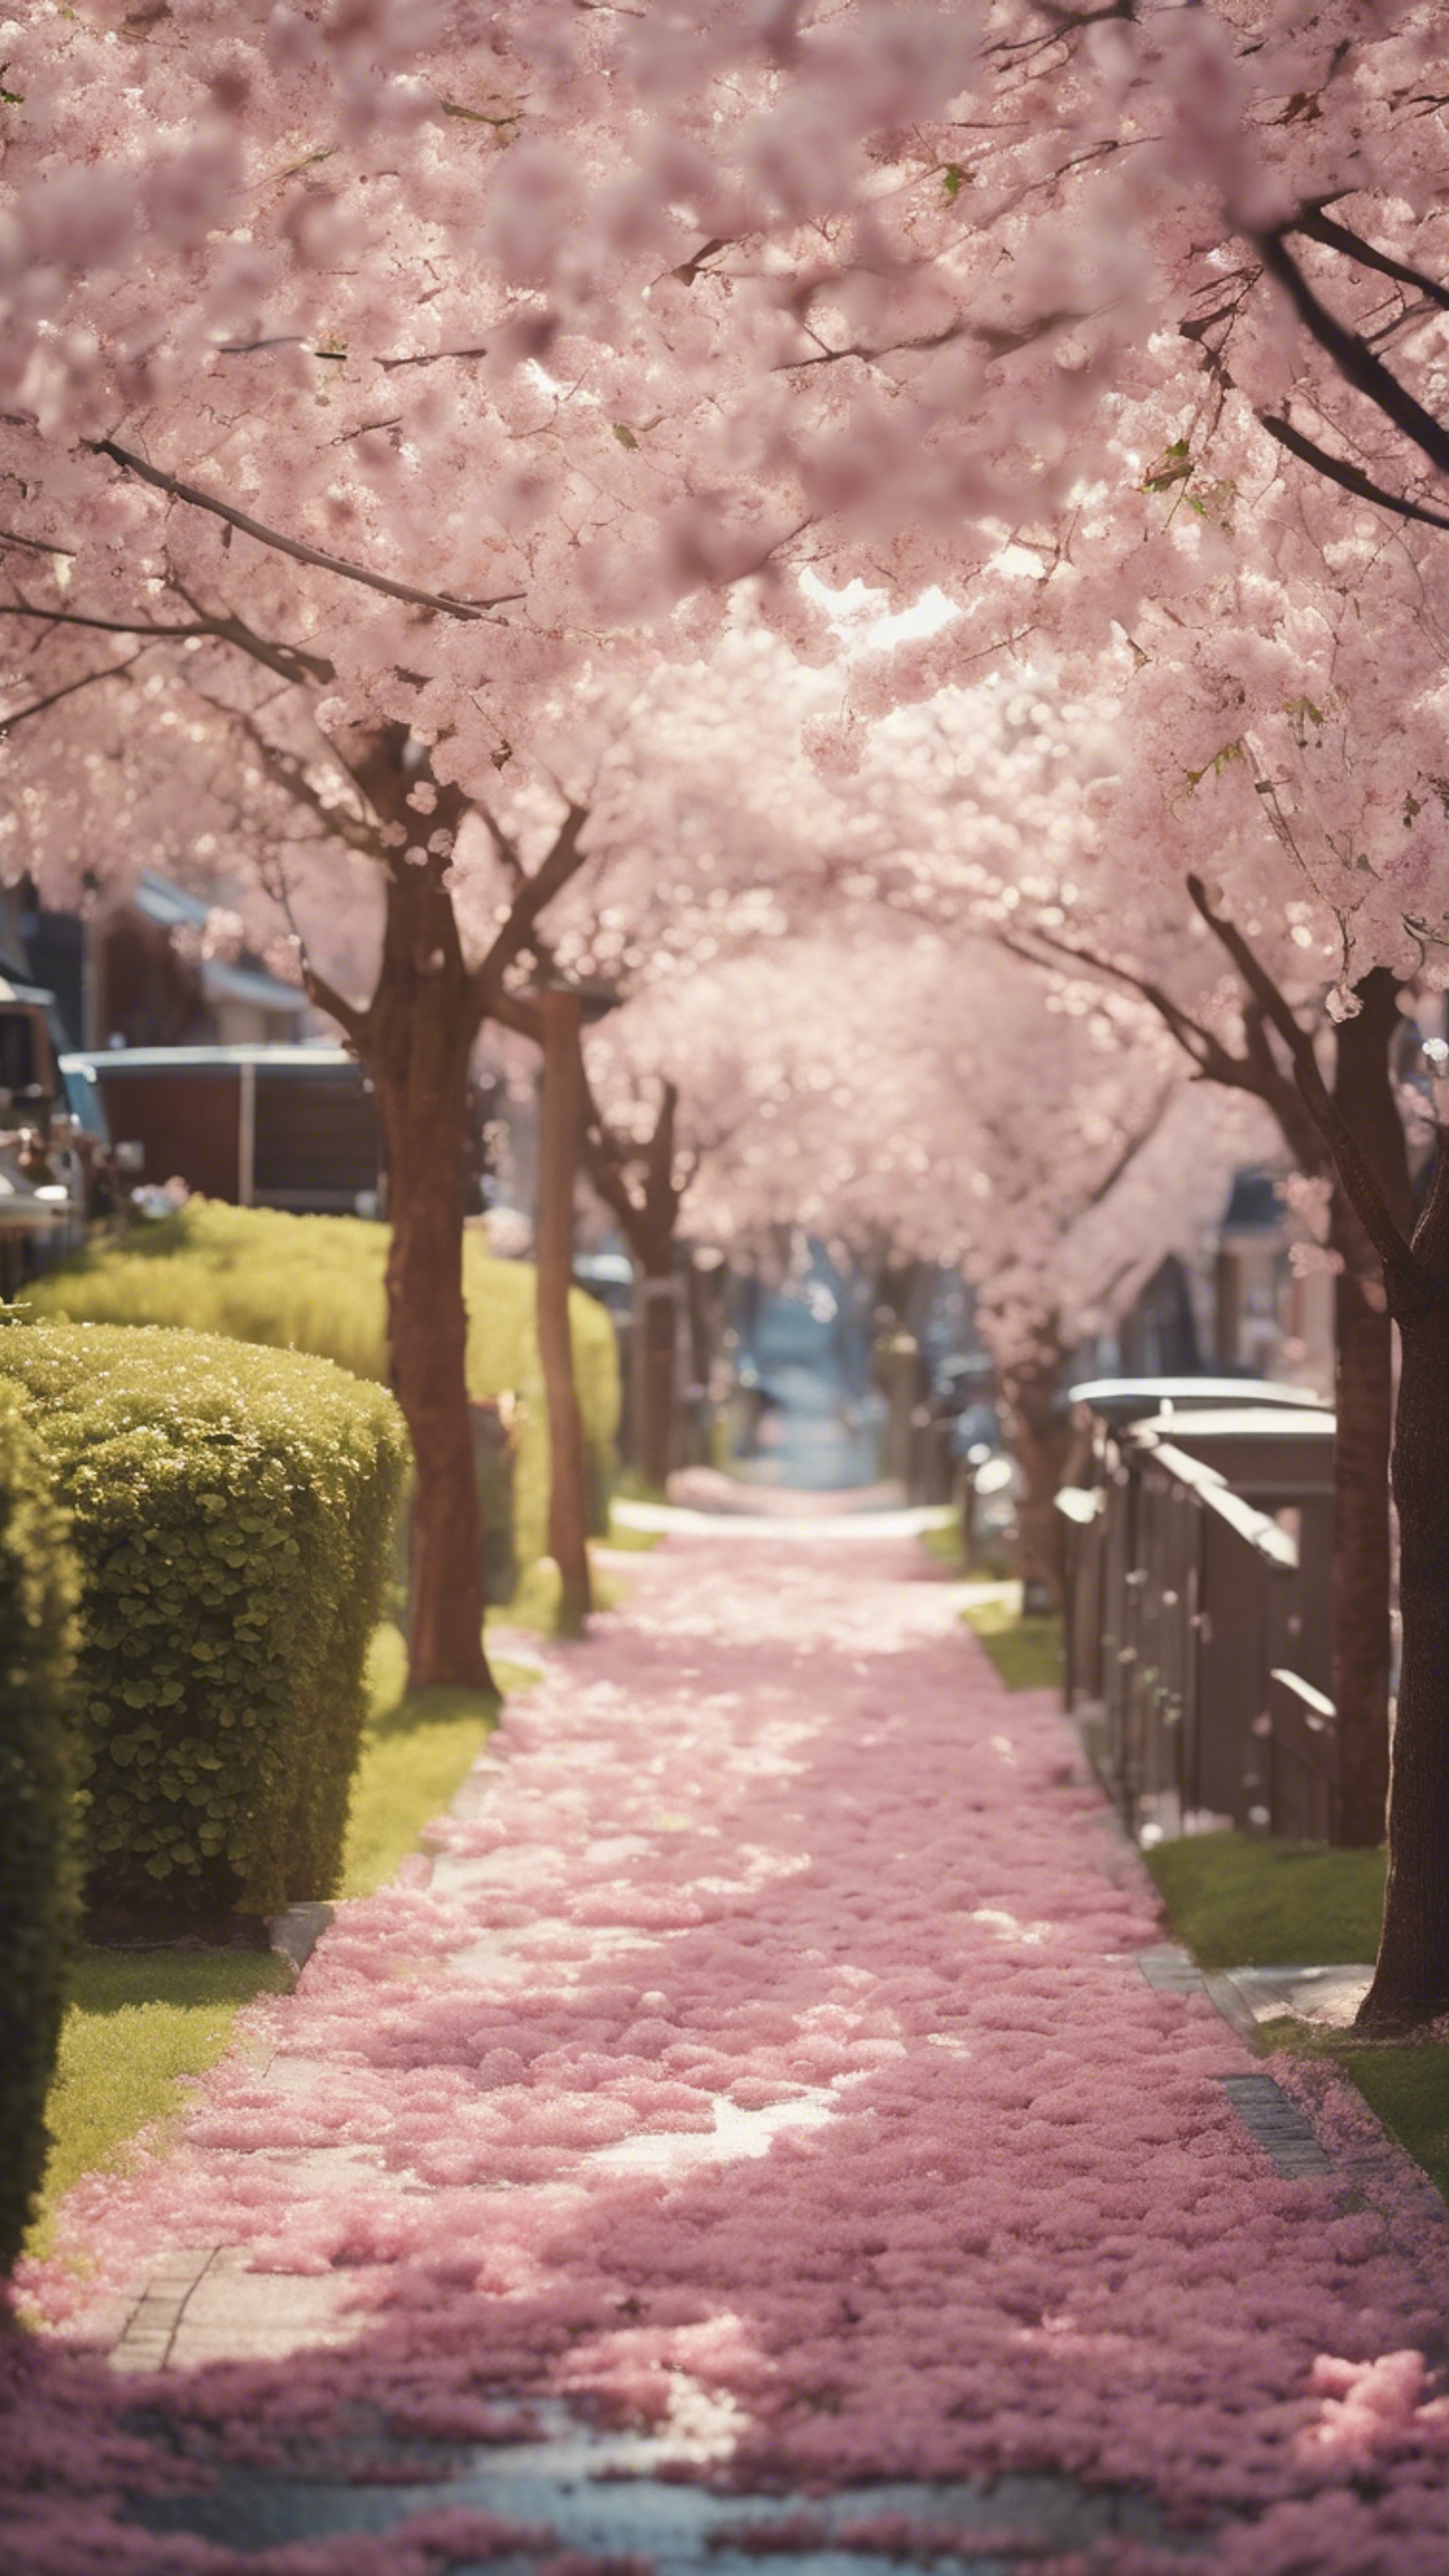 A suburban street lined with houses, and cherry blossom trees showering the pathway with petals, giving an ethereal feel to a sunny spring morning. Tapet[d085be0bf6ea43718843]